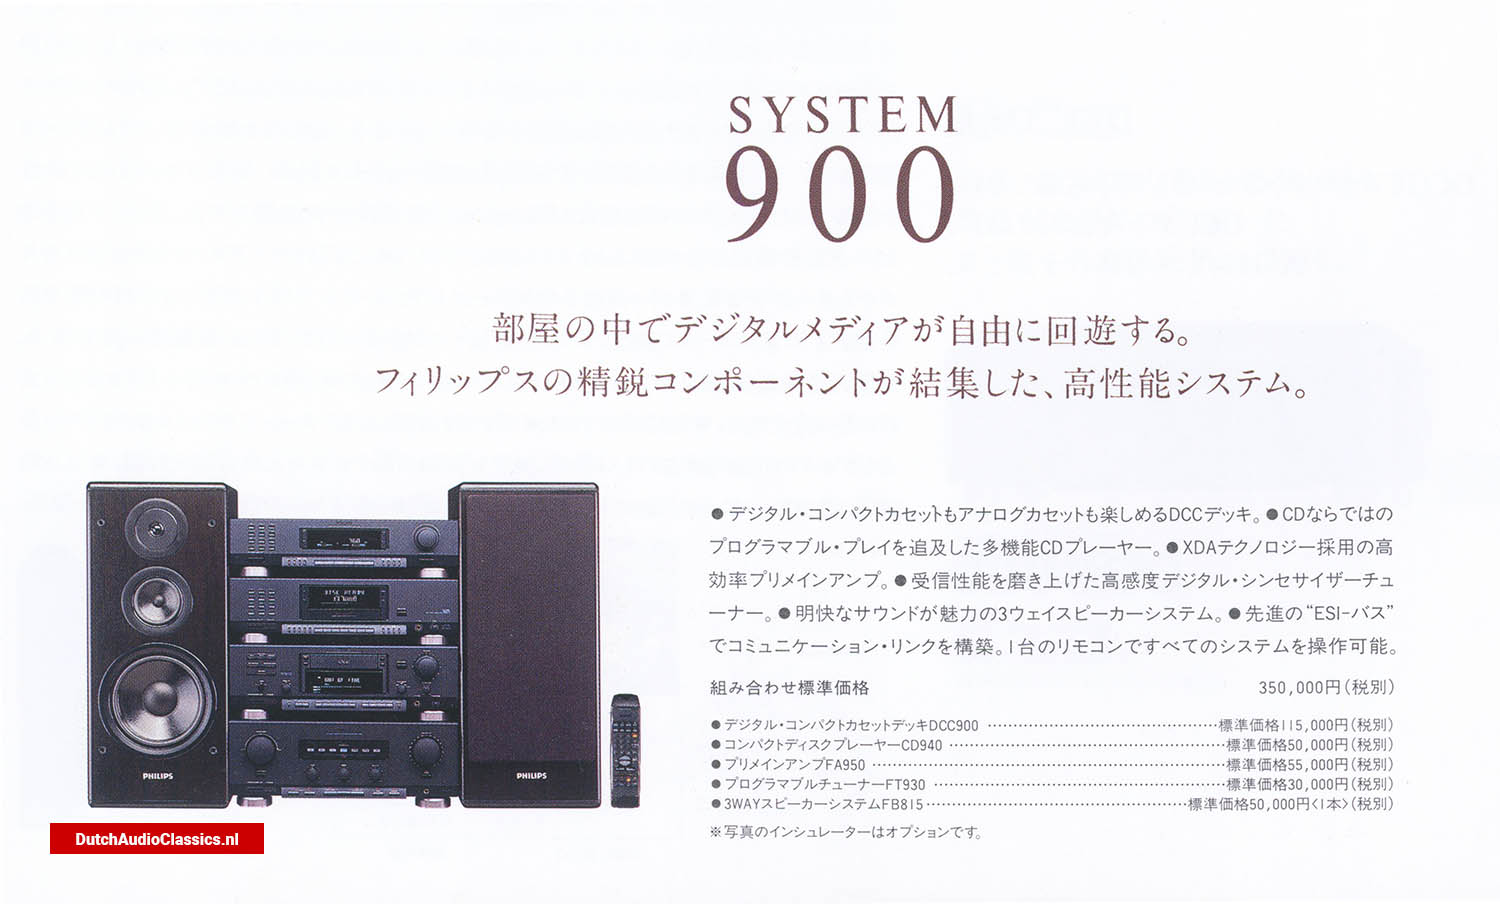 Philips 900 system 900 series